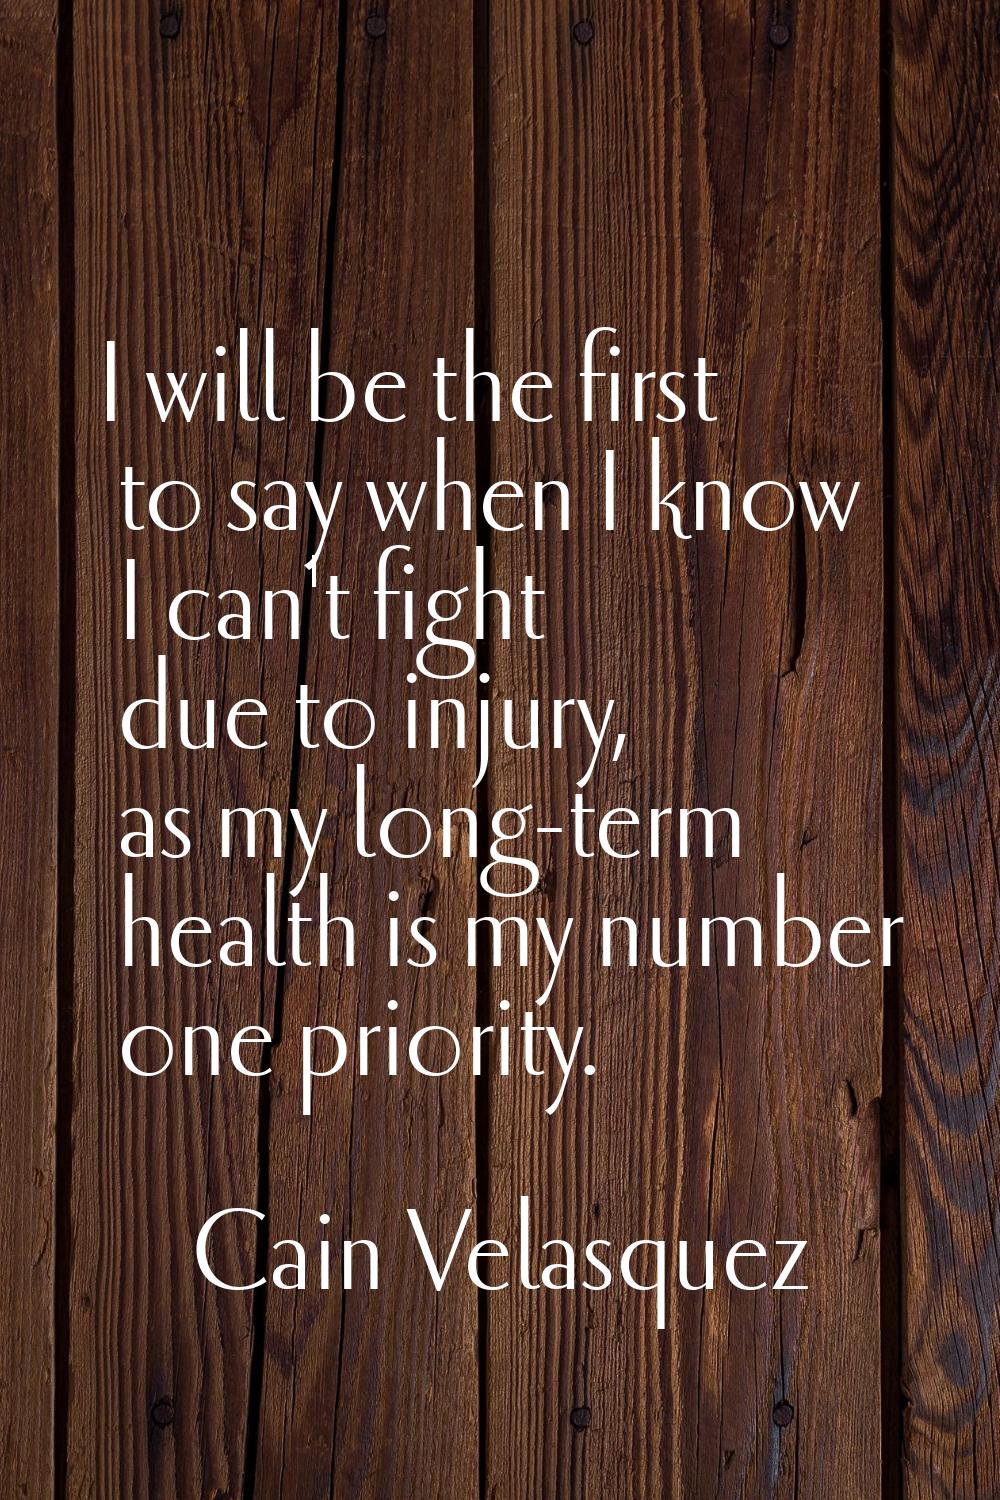 I will be the first to say when I know I can't fight due to injury, as my long-term health is my nu